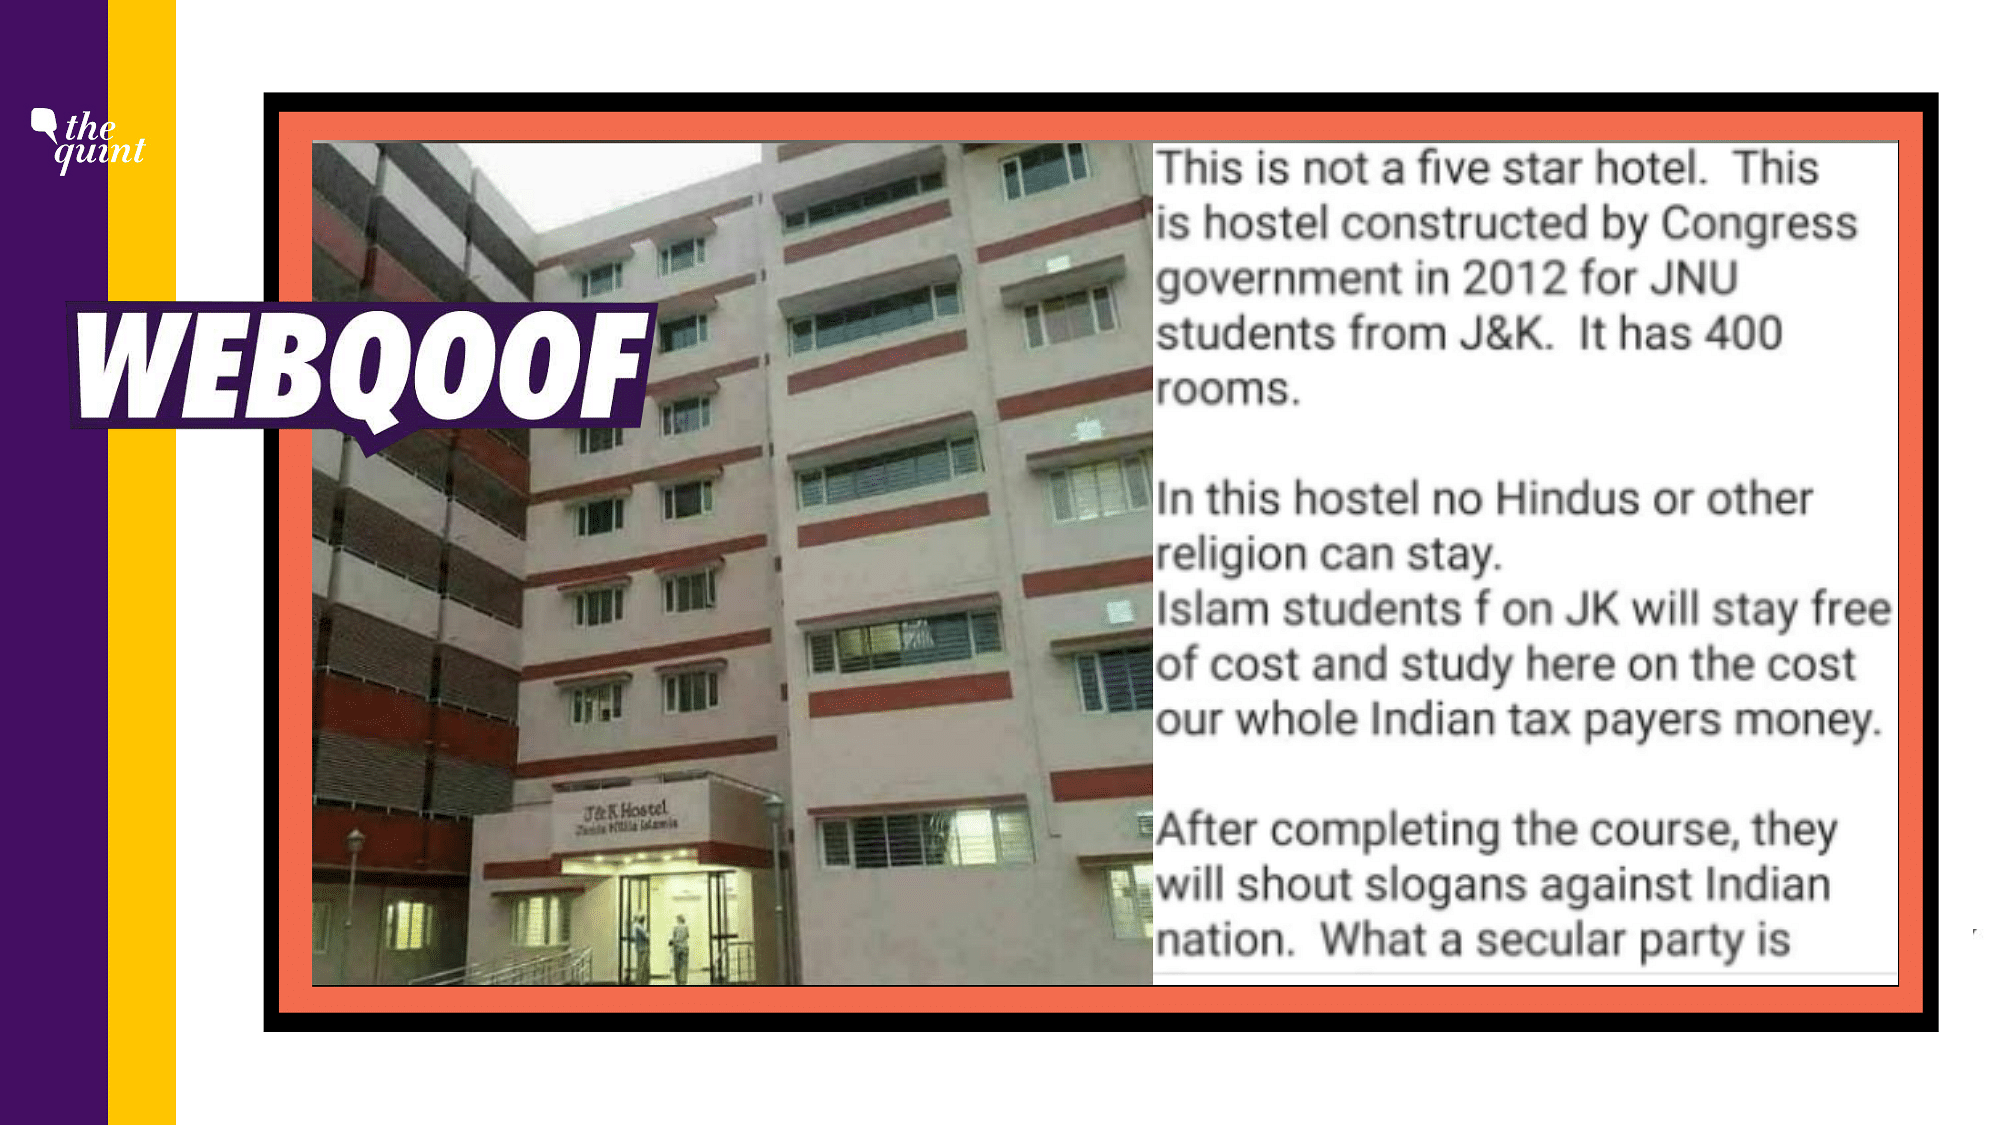 JNU and JMI University do not offer free accommodation or any preference to students of a particular religion.